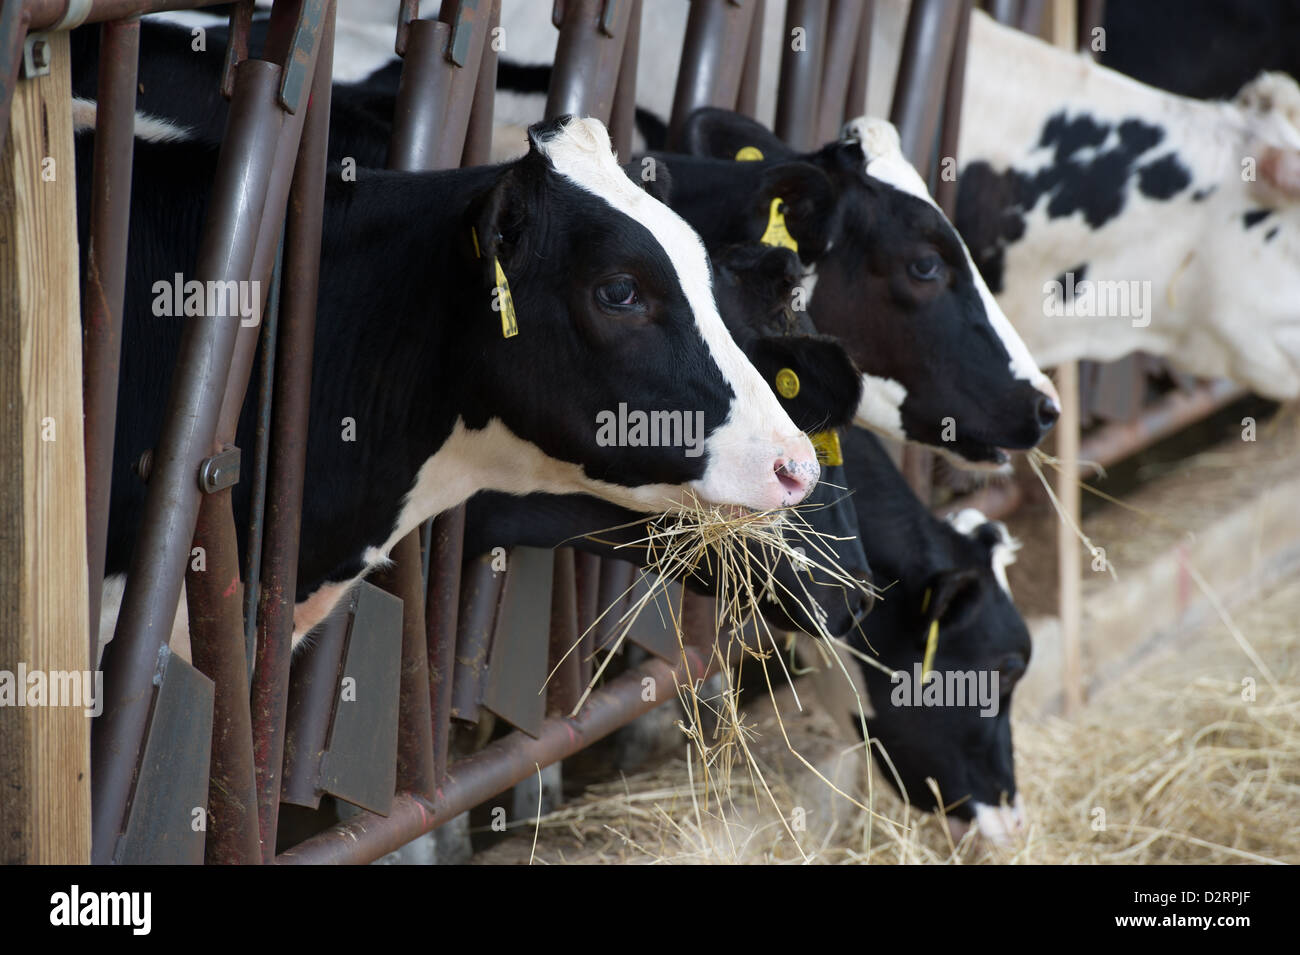 Dairy cows grazing on hay in the barn  Stock Photo